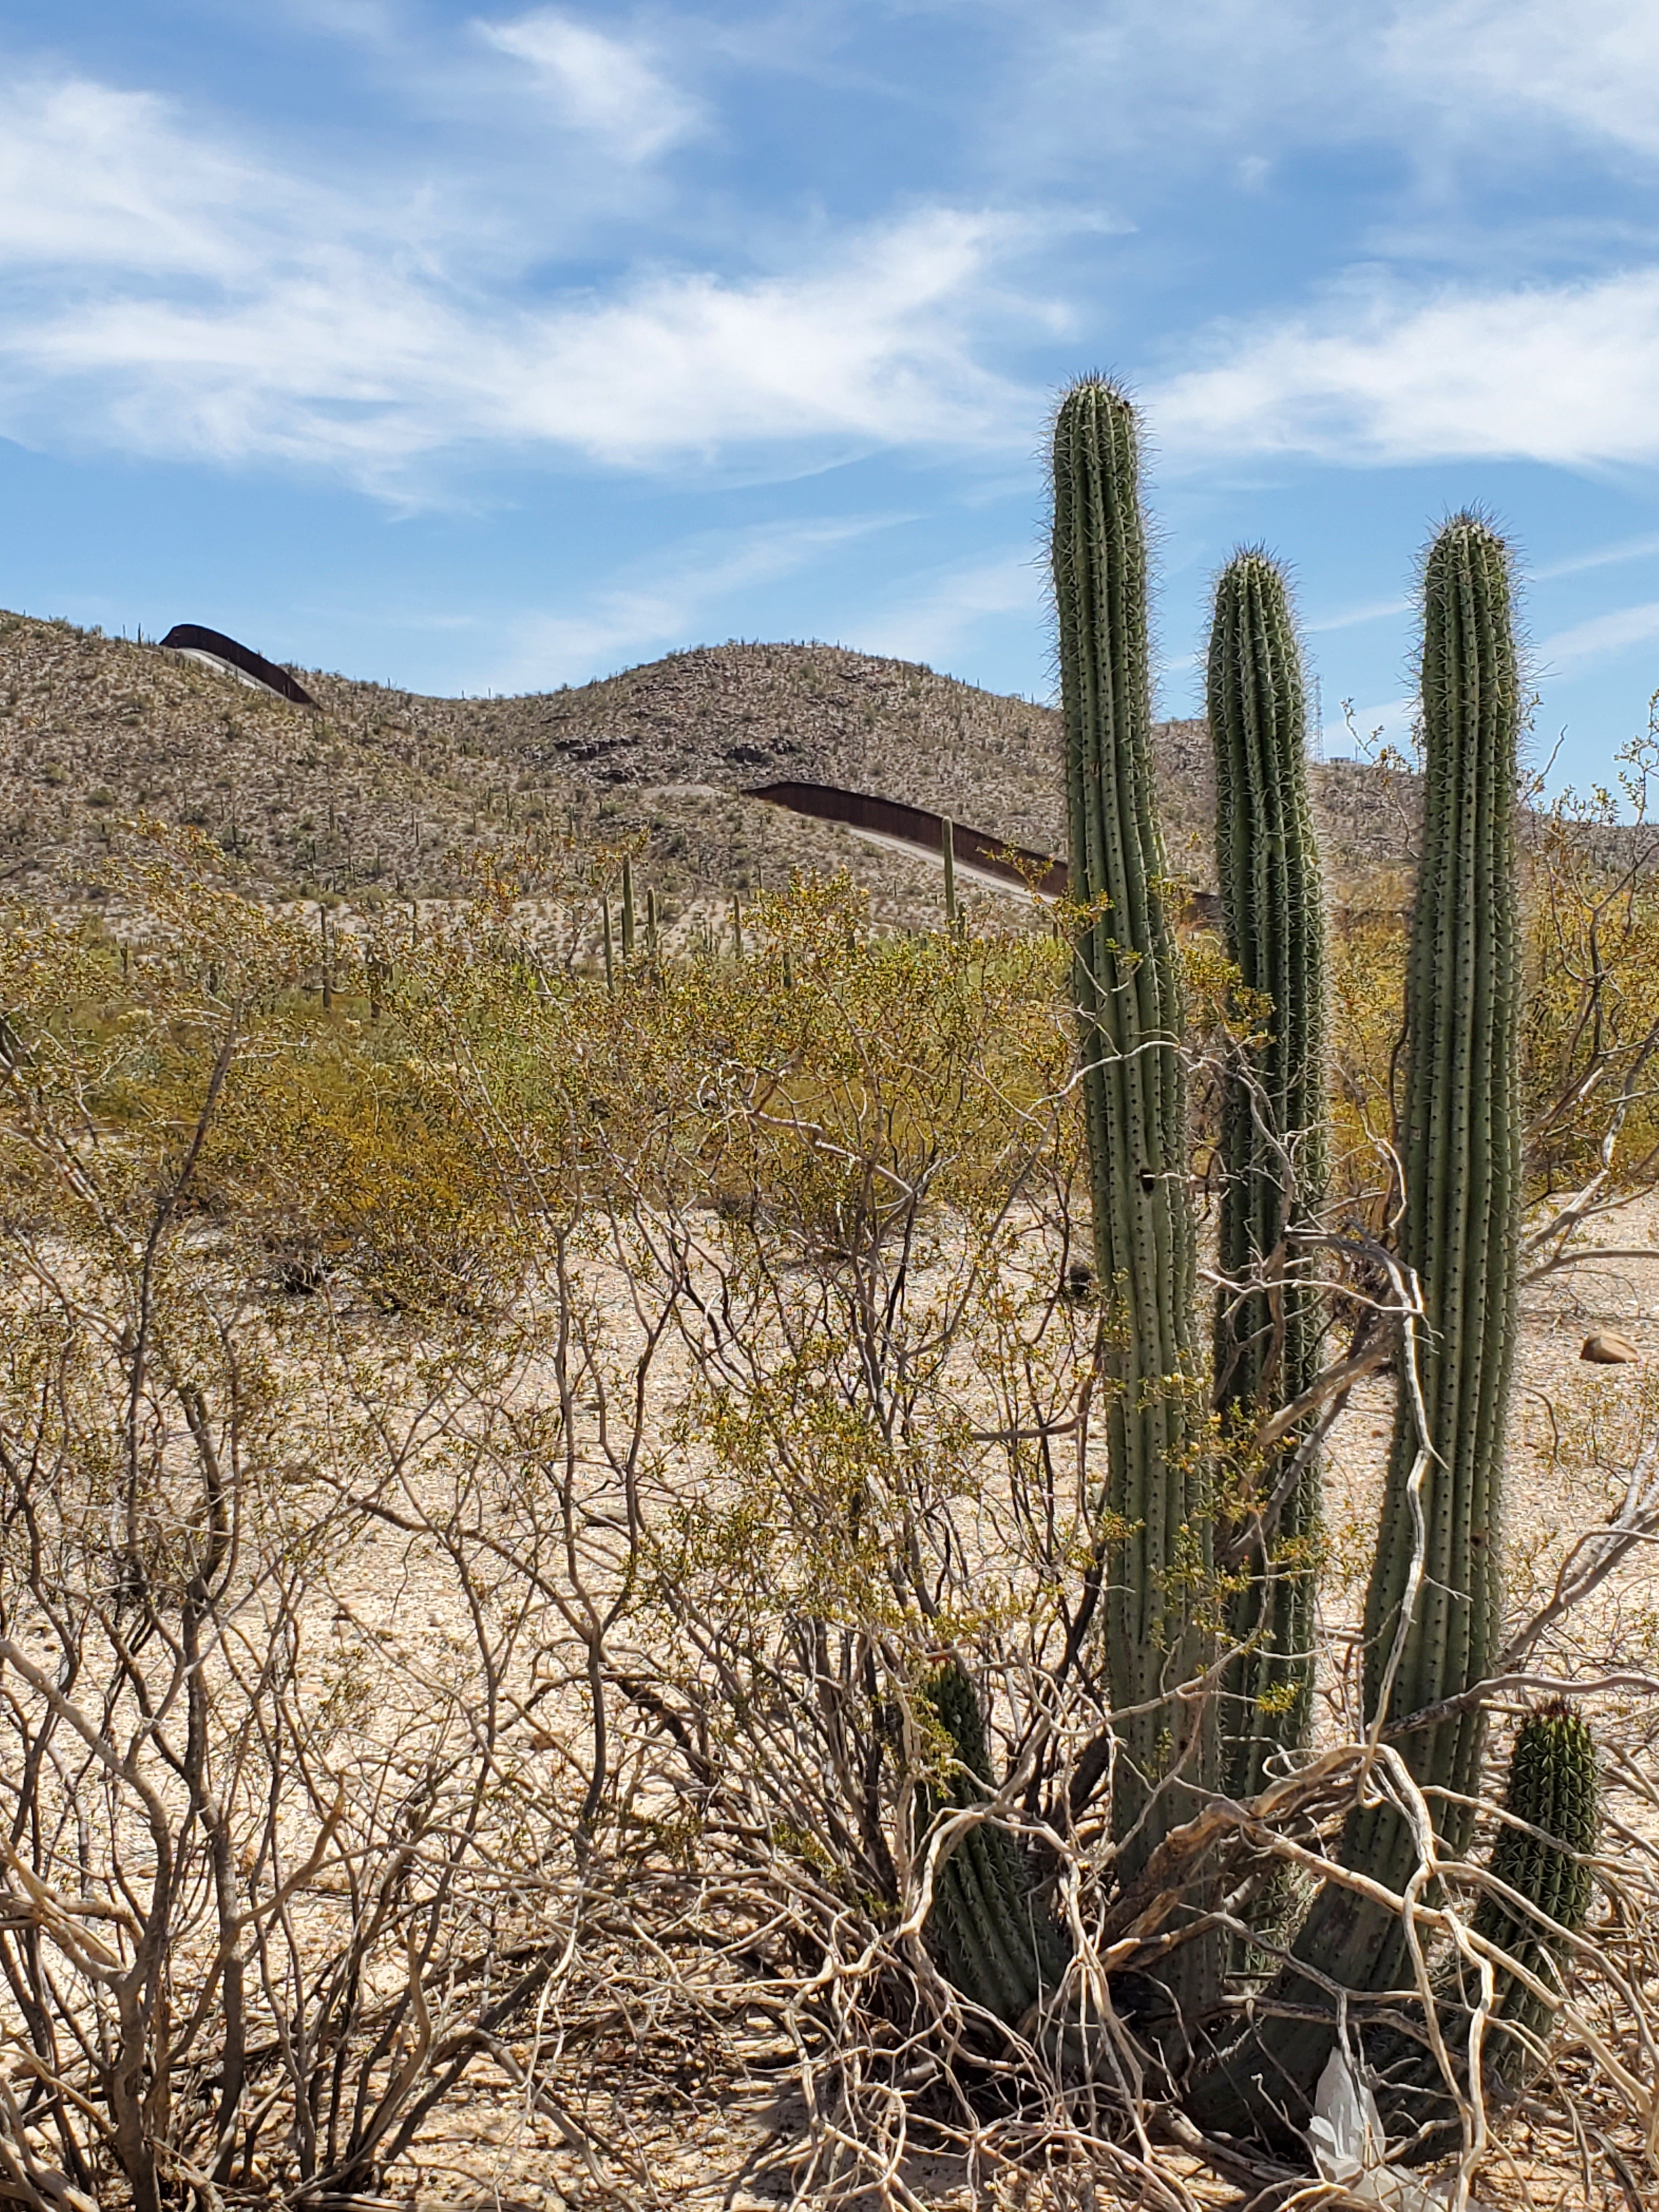 The Sonoran Desert with the U.S.-Mexico border wall in the background